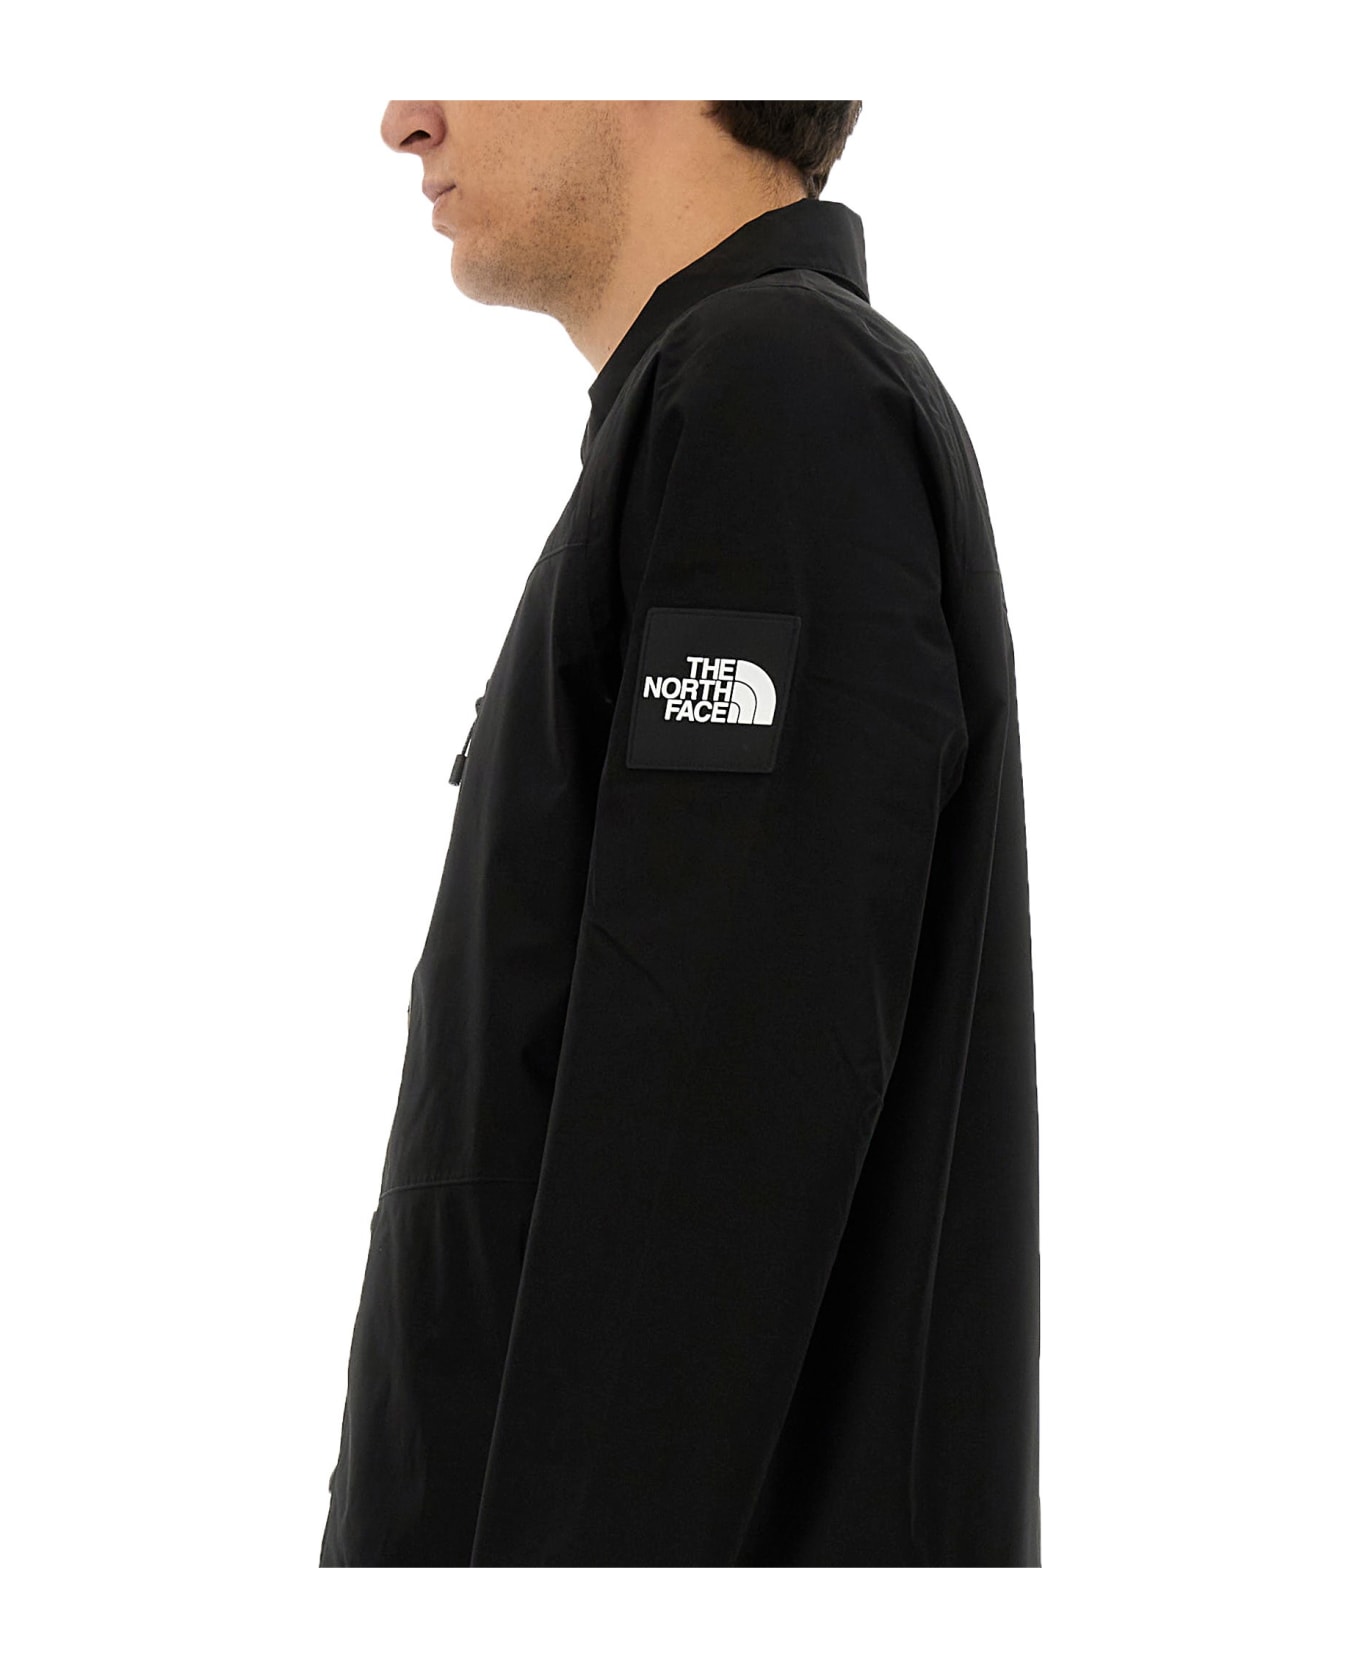 The North Face Jacket With Logo - Black